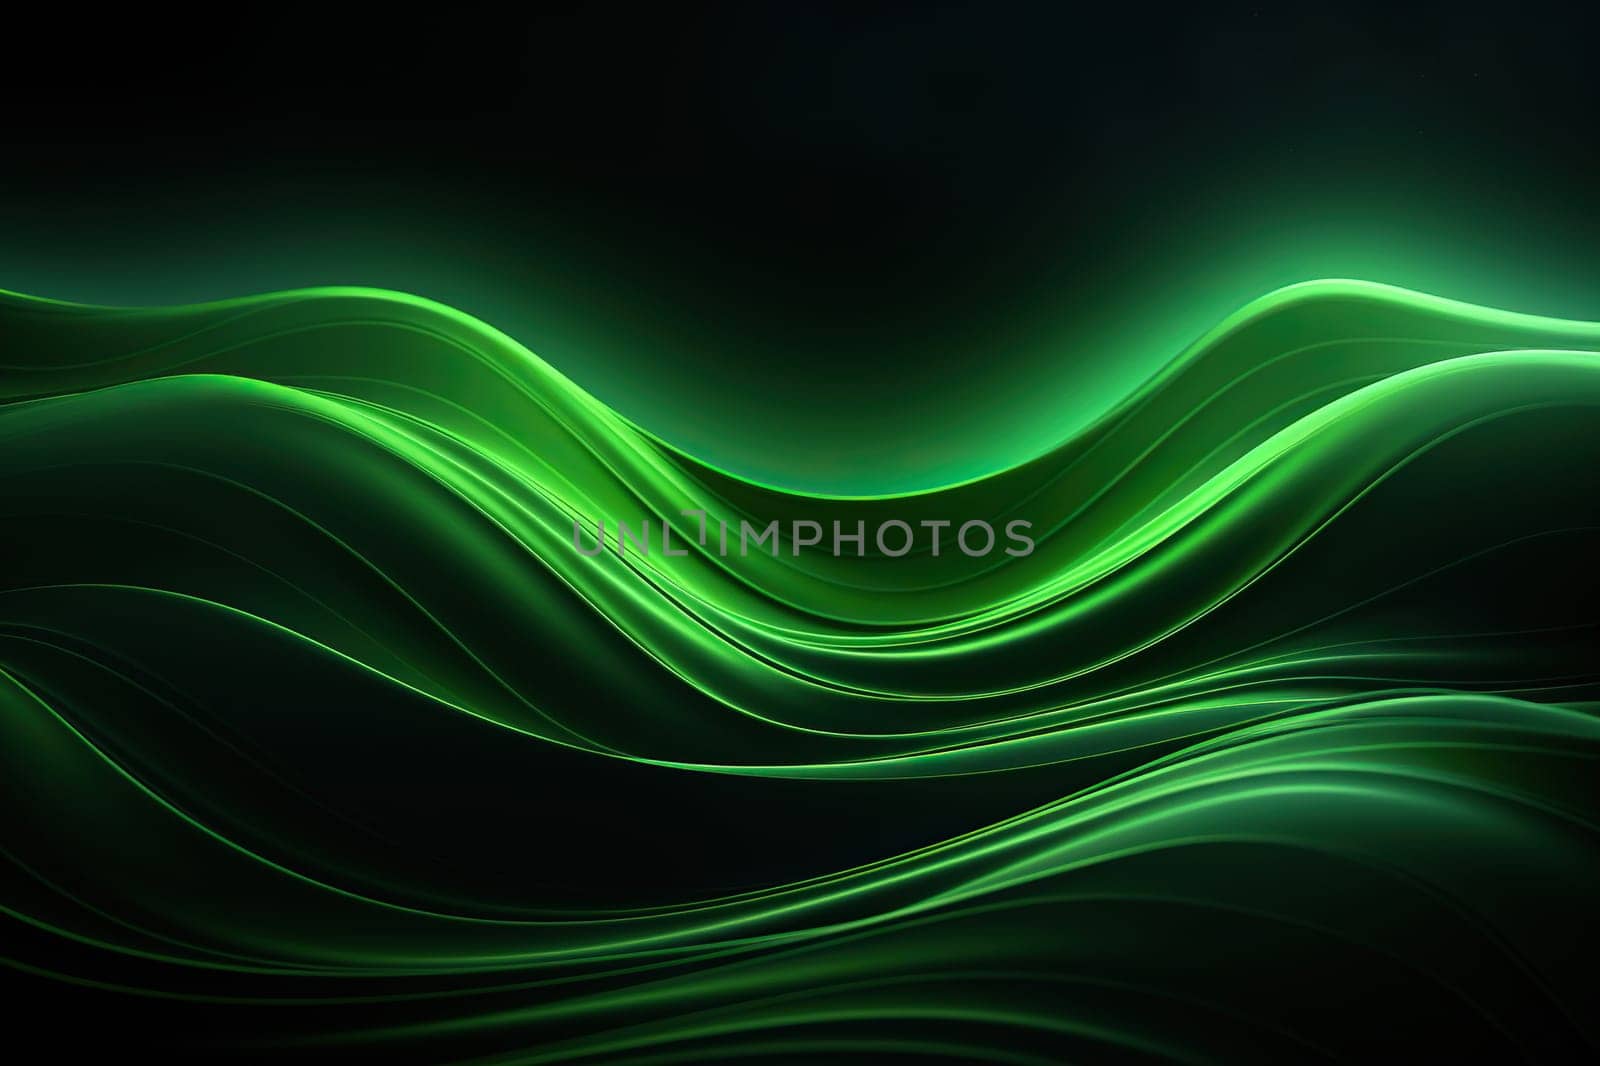 Horizontal background with abstract green waves. Generated by artificial intelligence by Vovmar